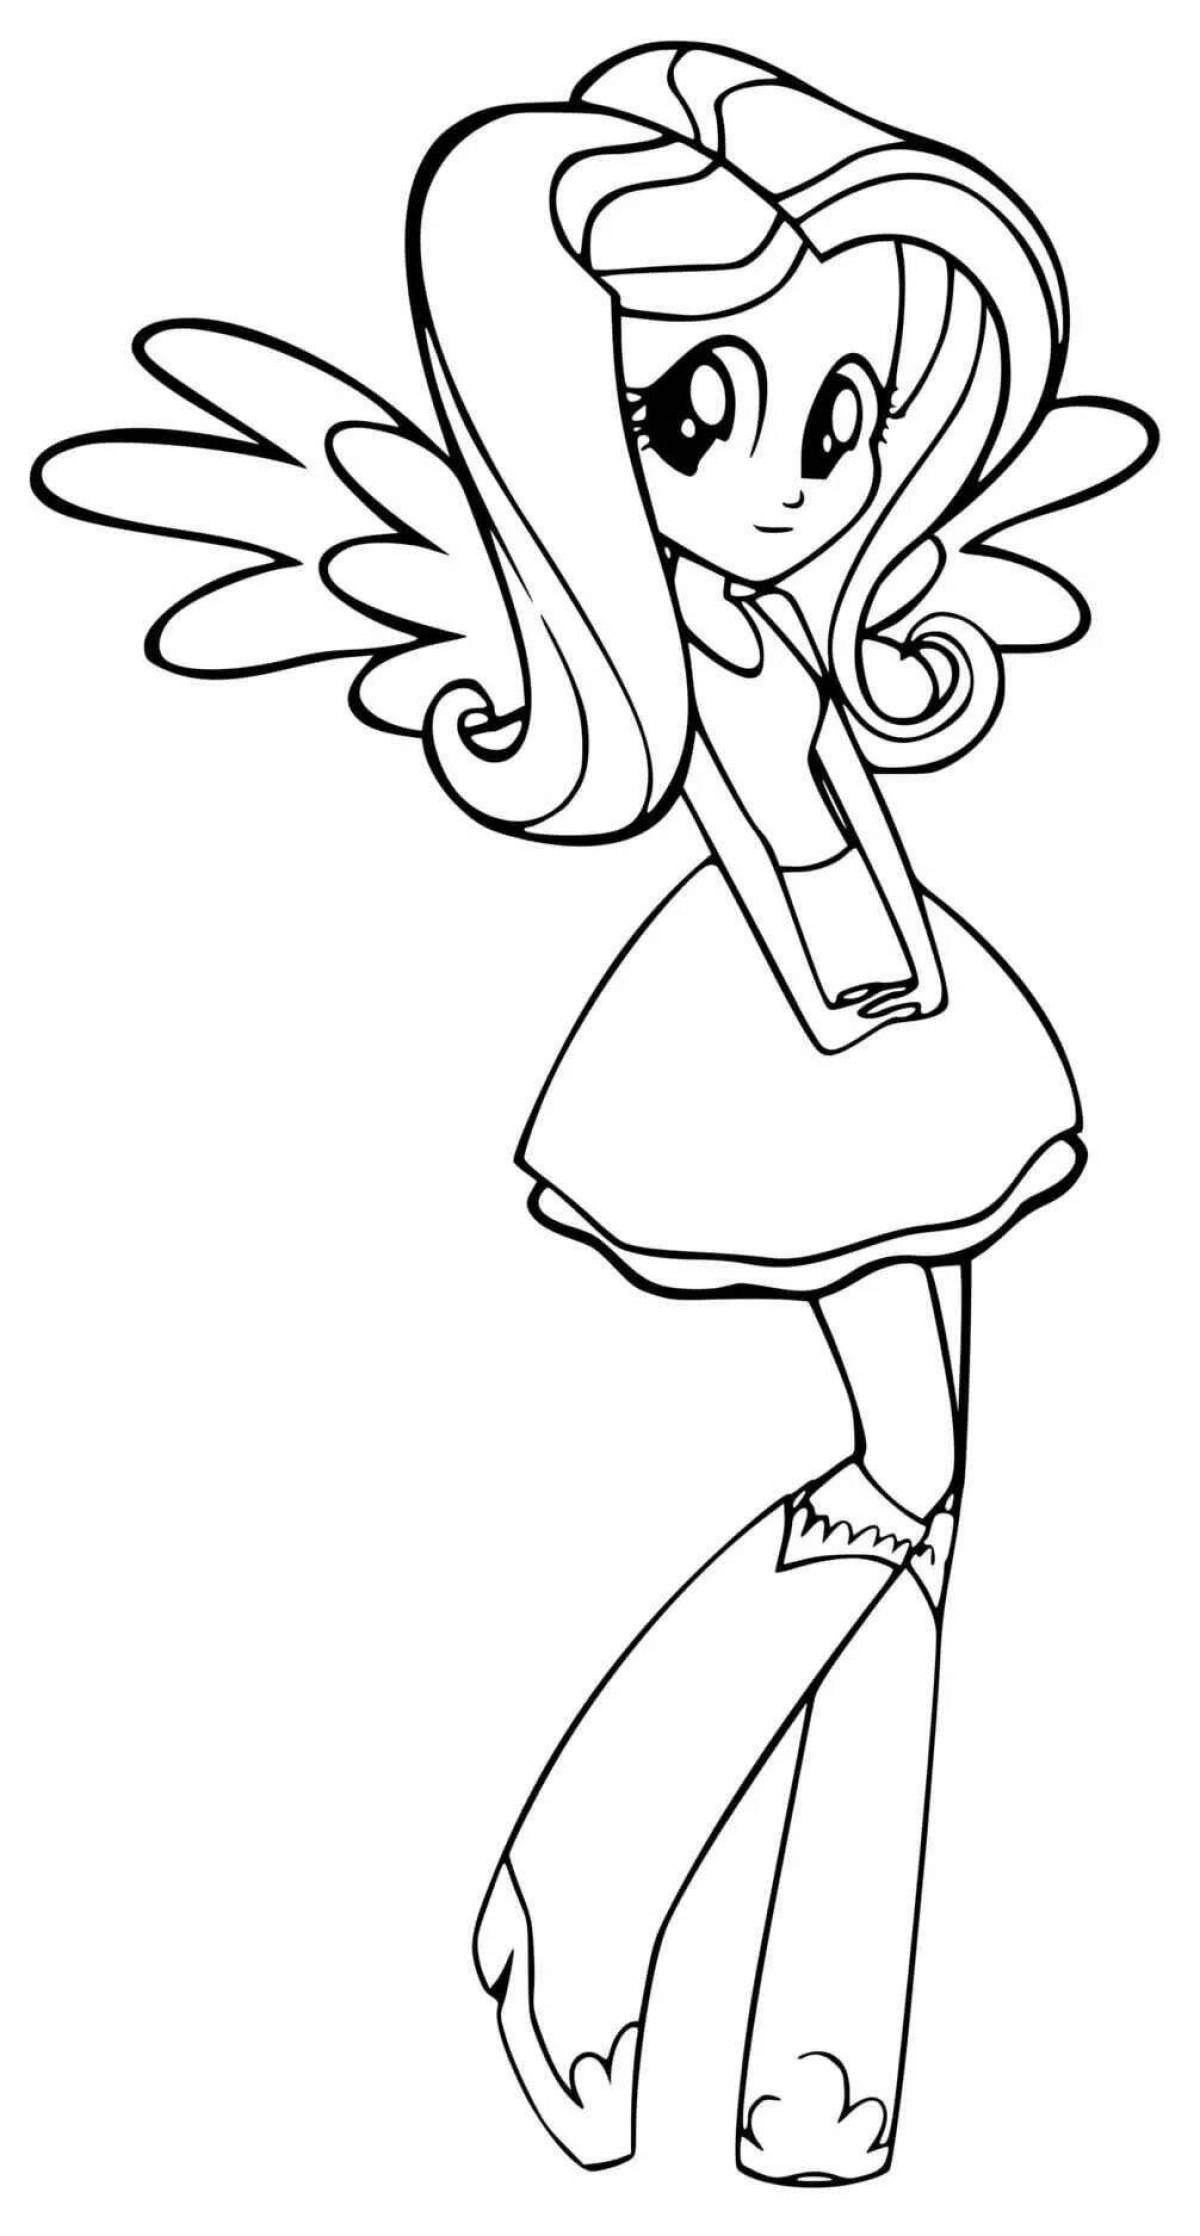 Pinkie Pie fairy tale equestria girls coloring page